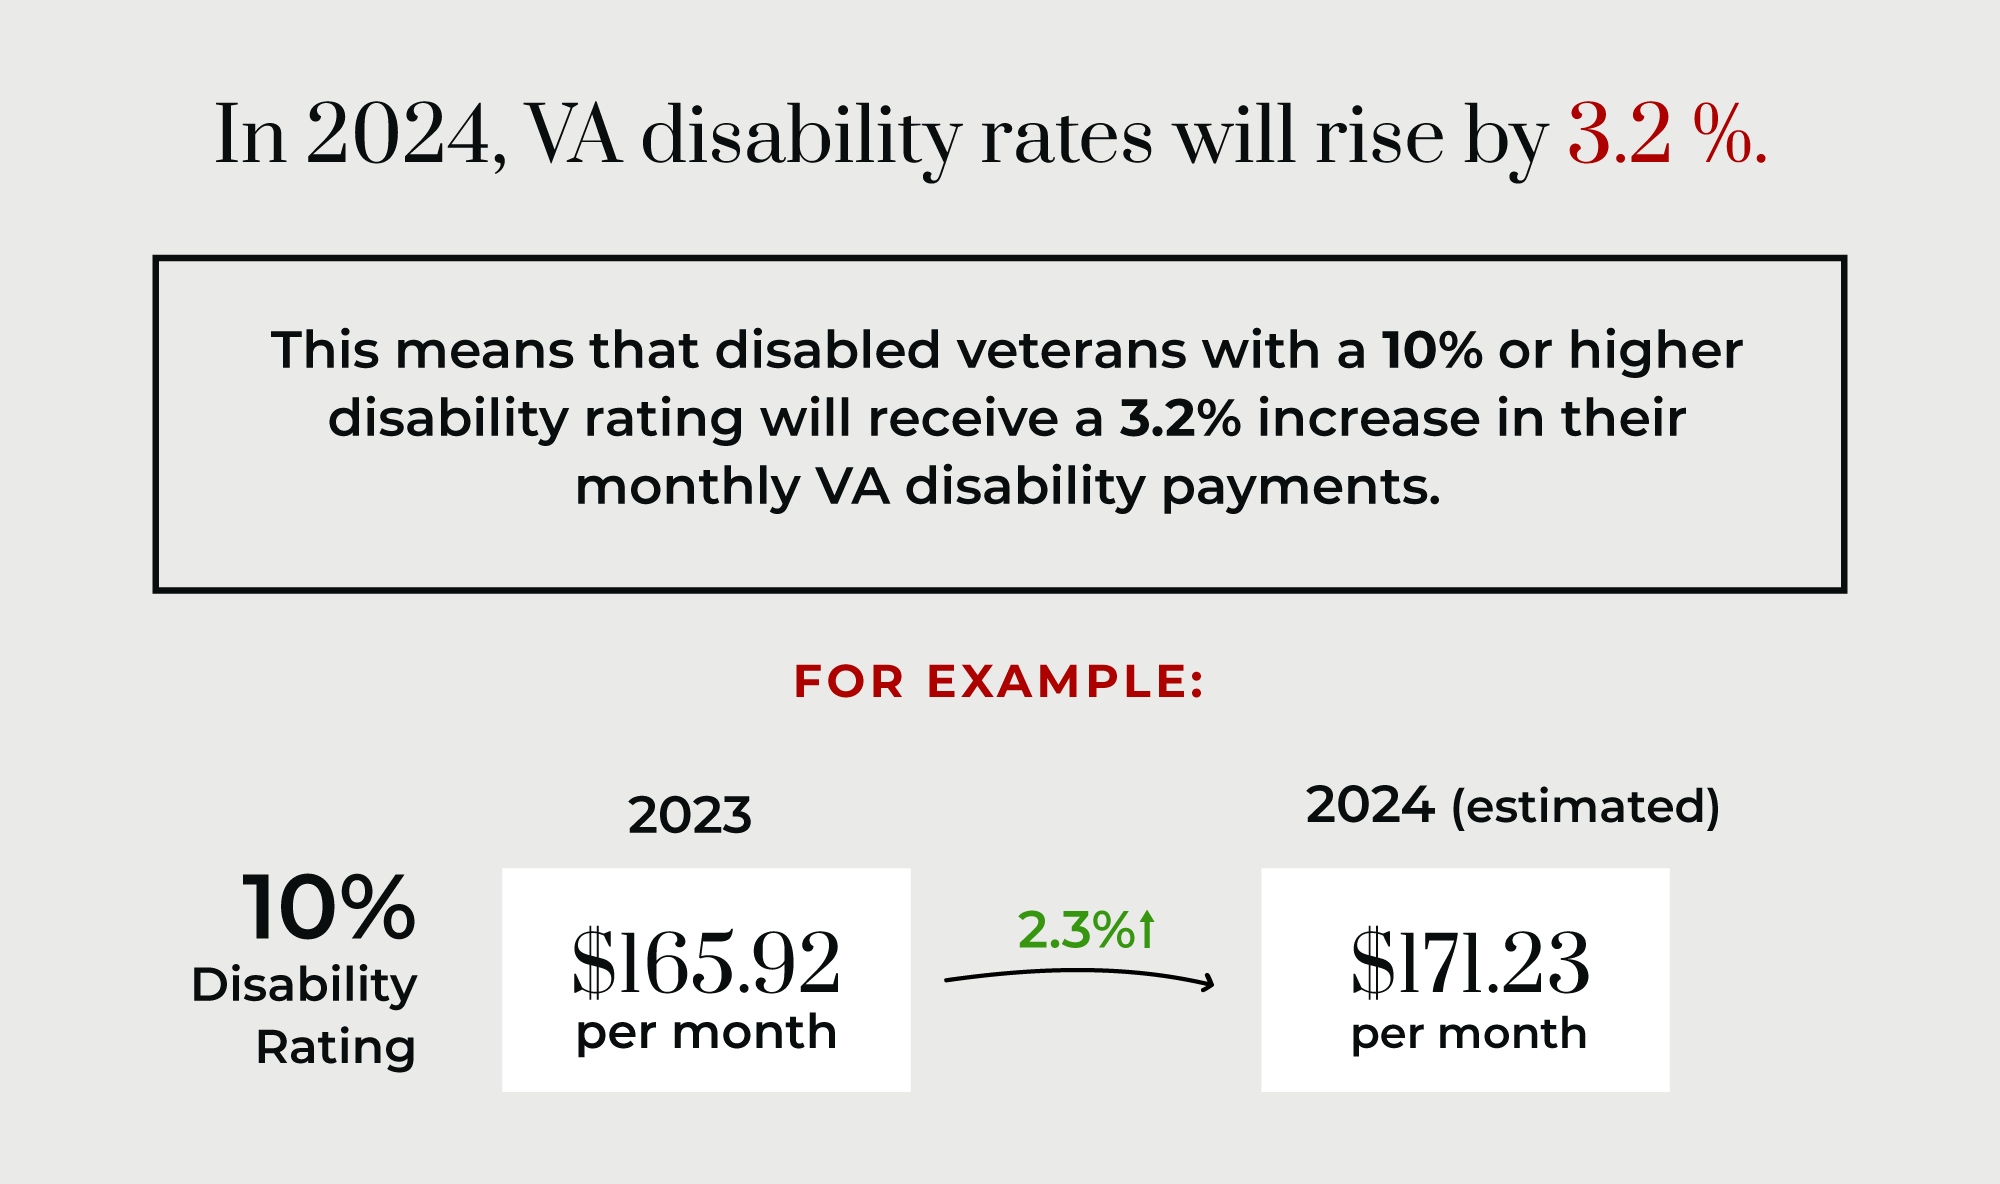 VA disability rates rising by 3.2%